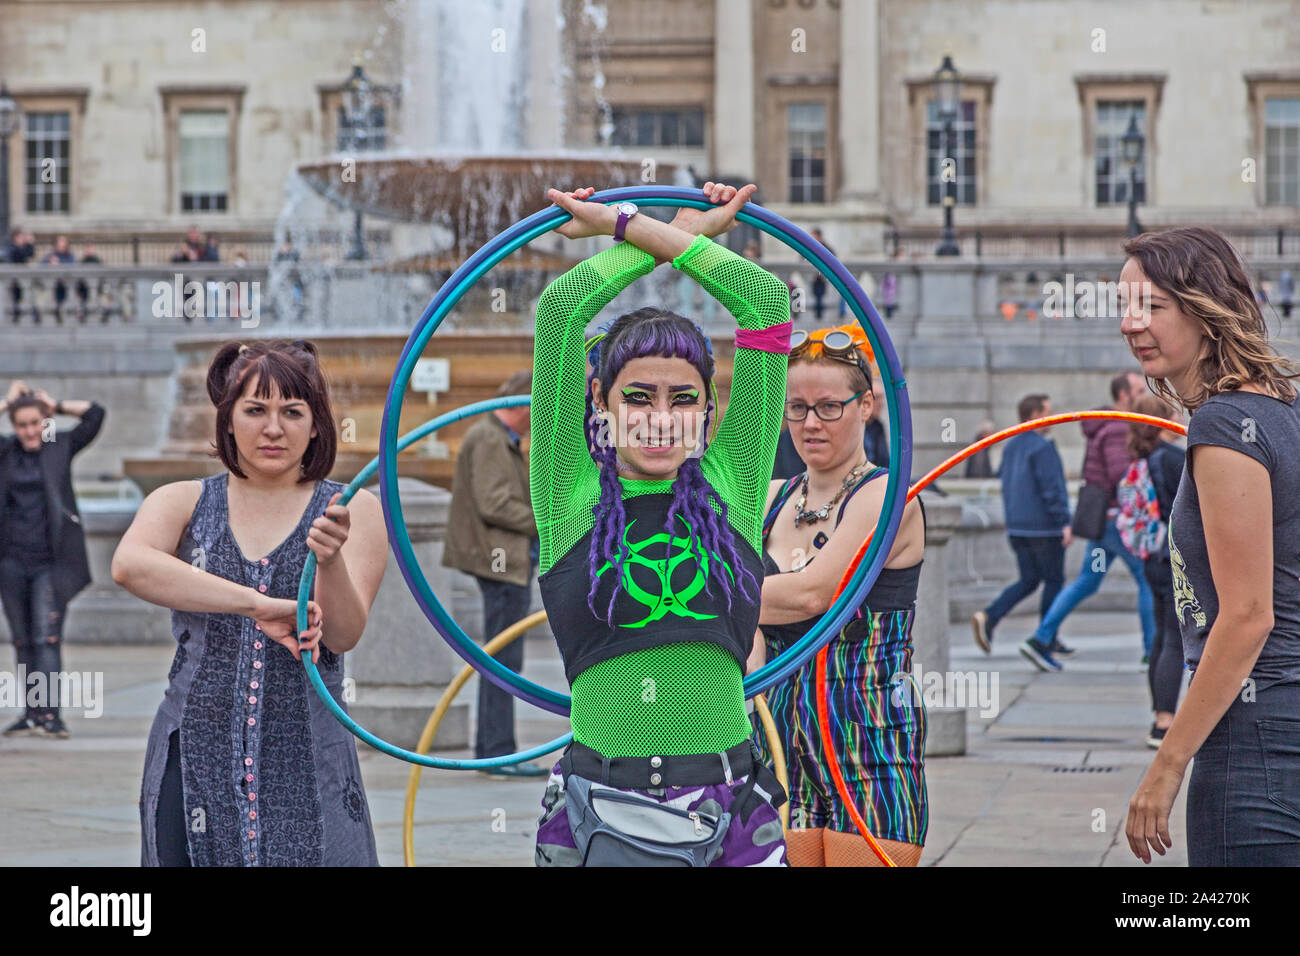 October 8th, 2019. The first day of Extinction Rebellion's occupation of Trafalgar Square.  Demonstrators whiling away the time with hula hoops. Stock Photo